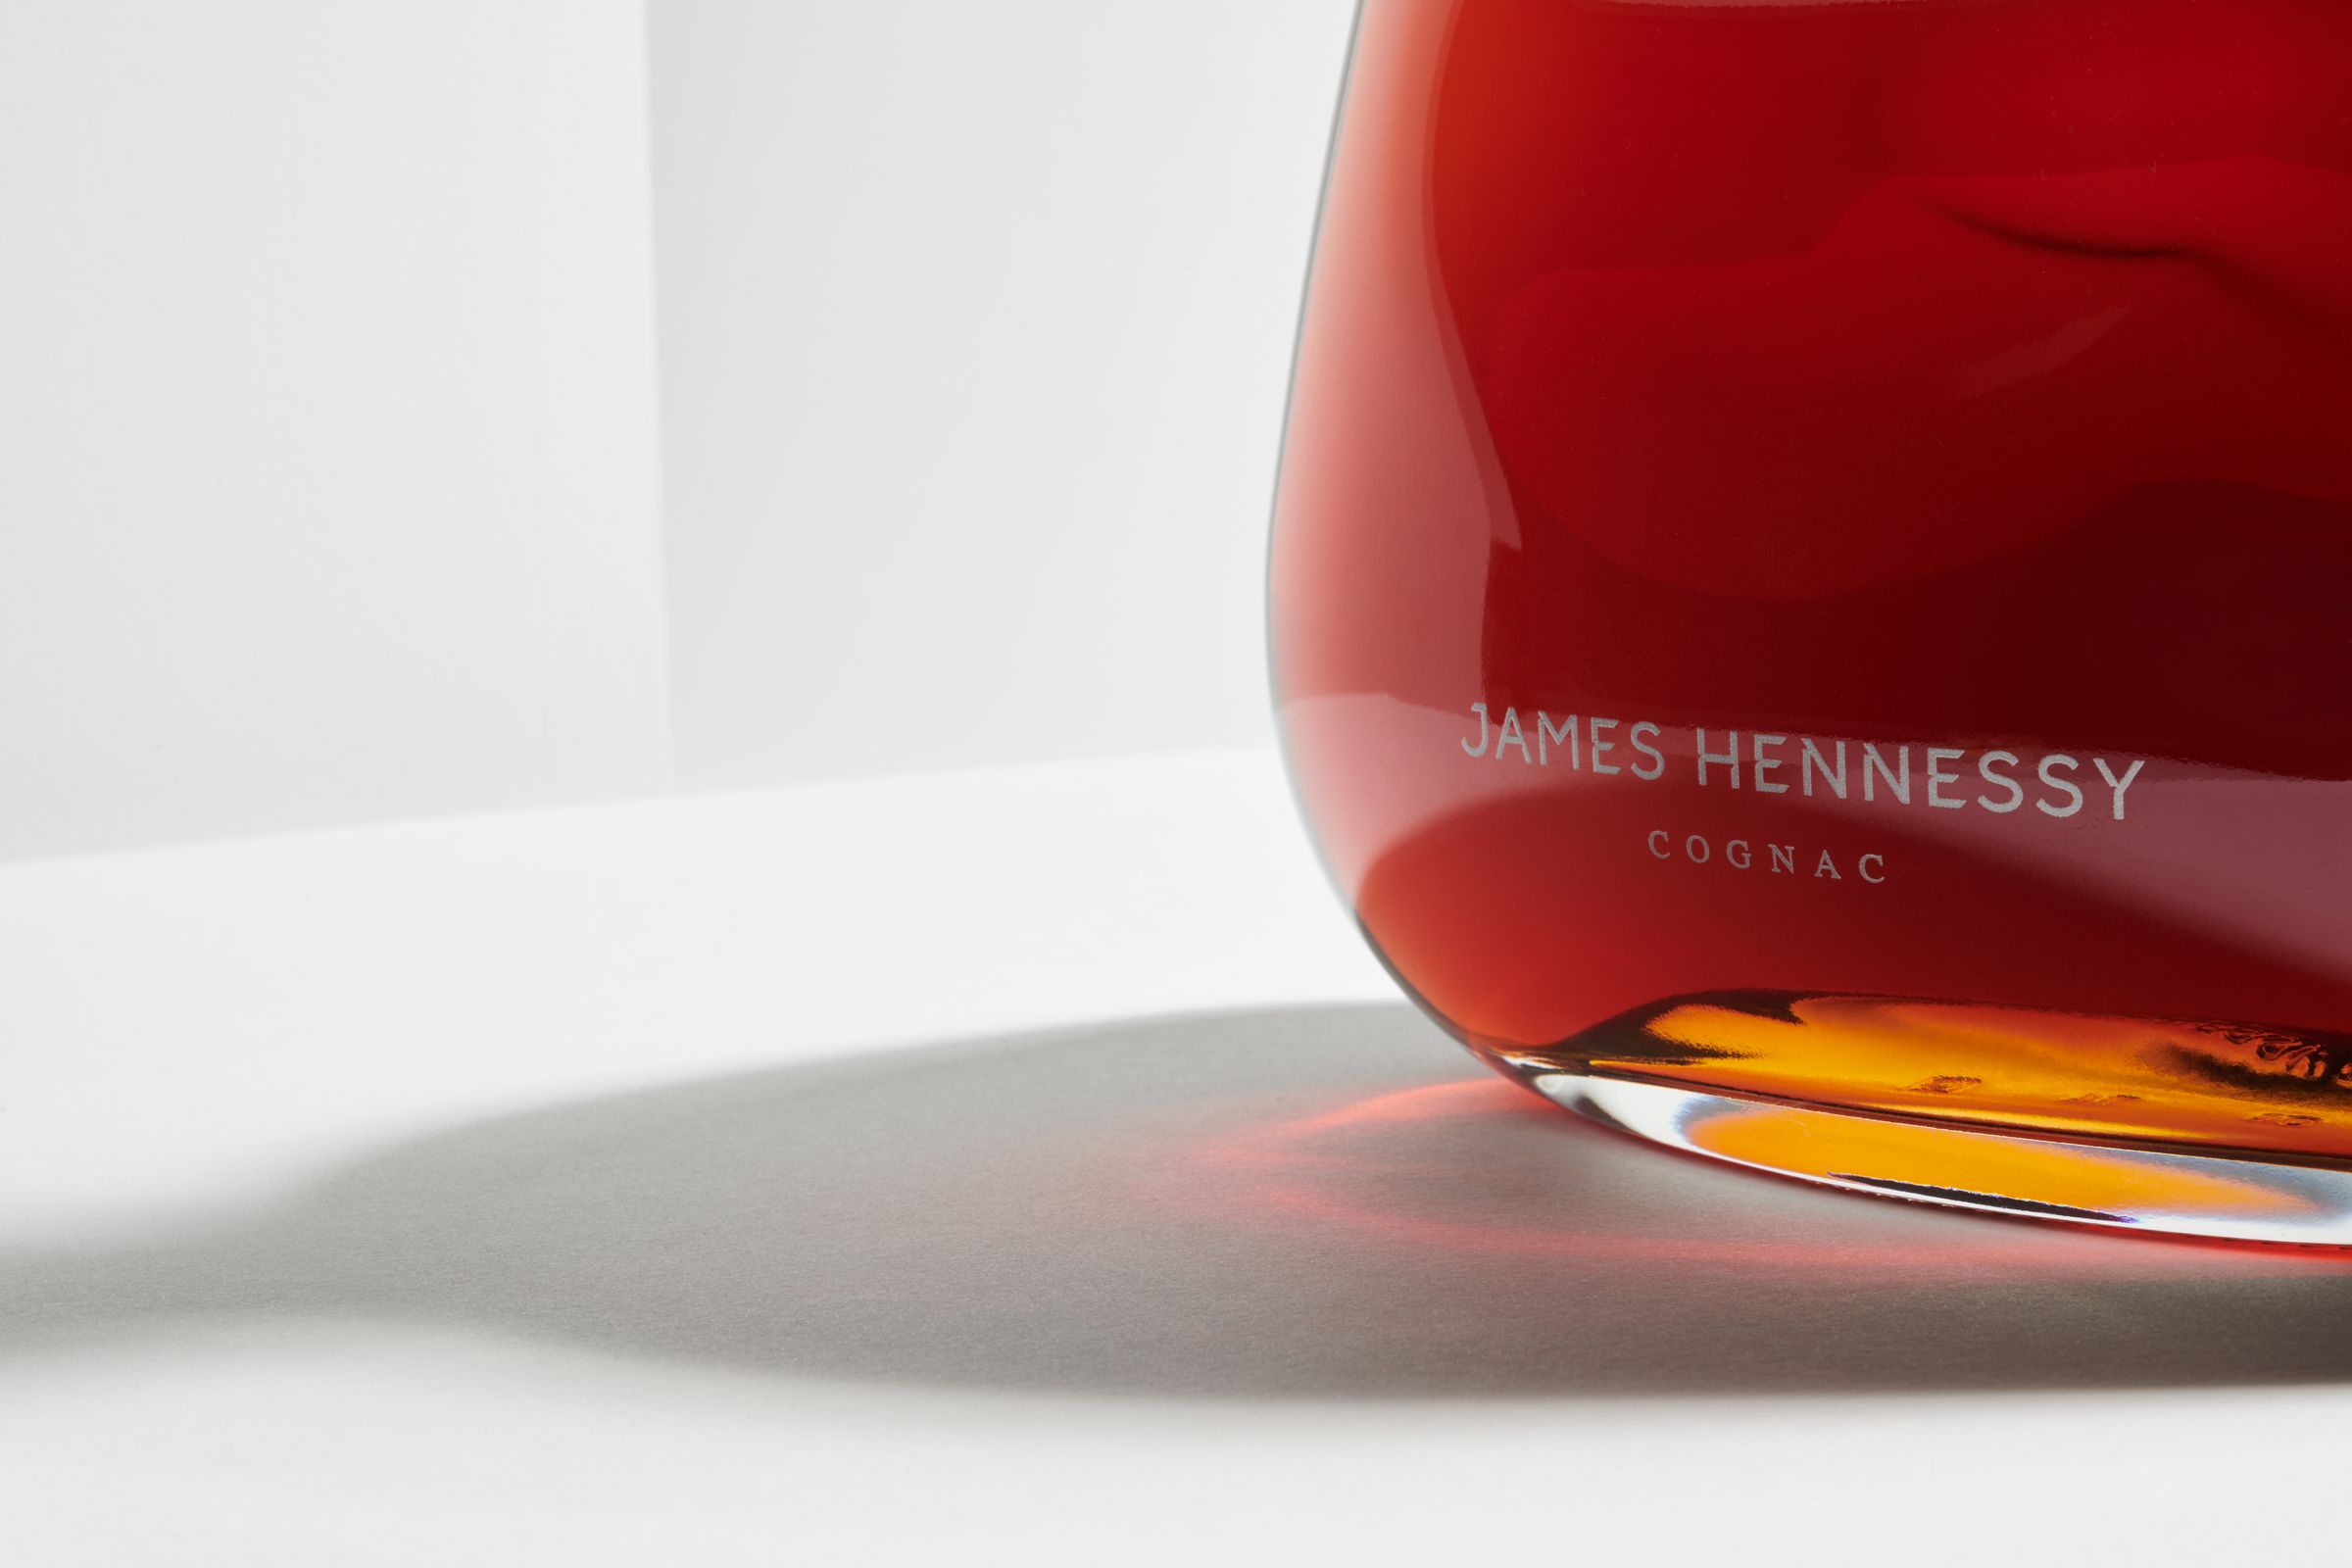 Hennessy product branding